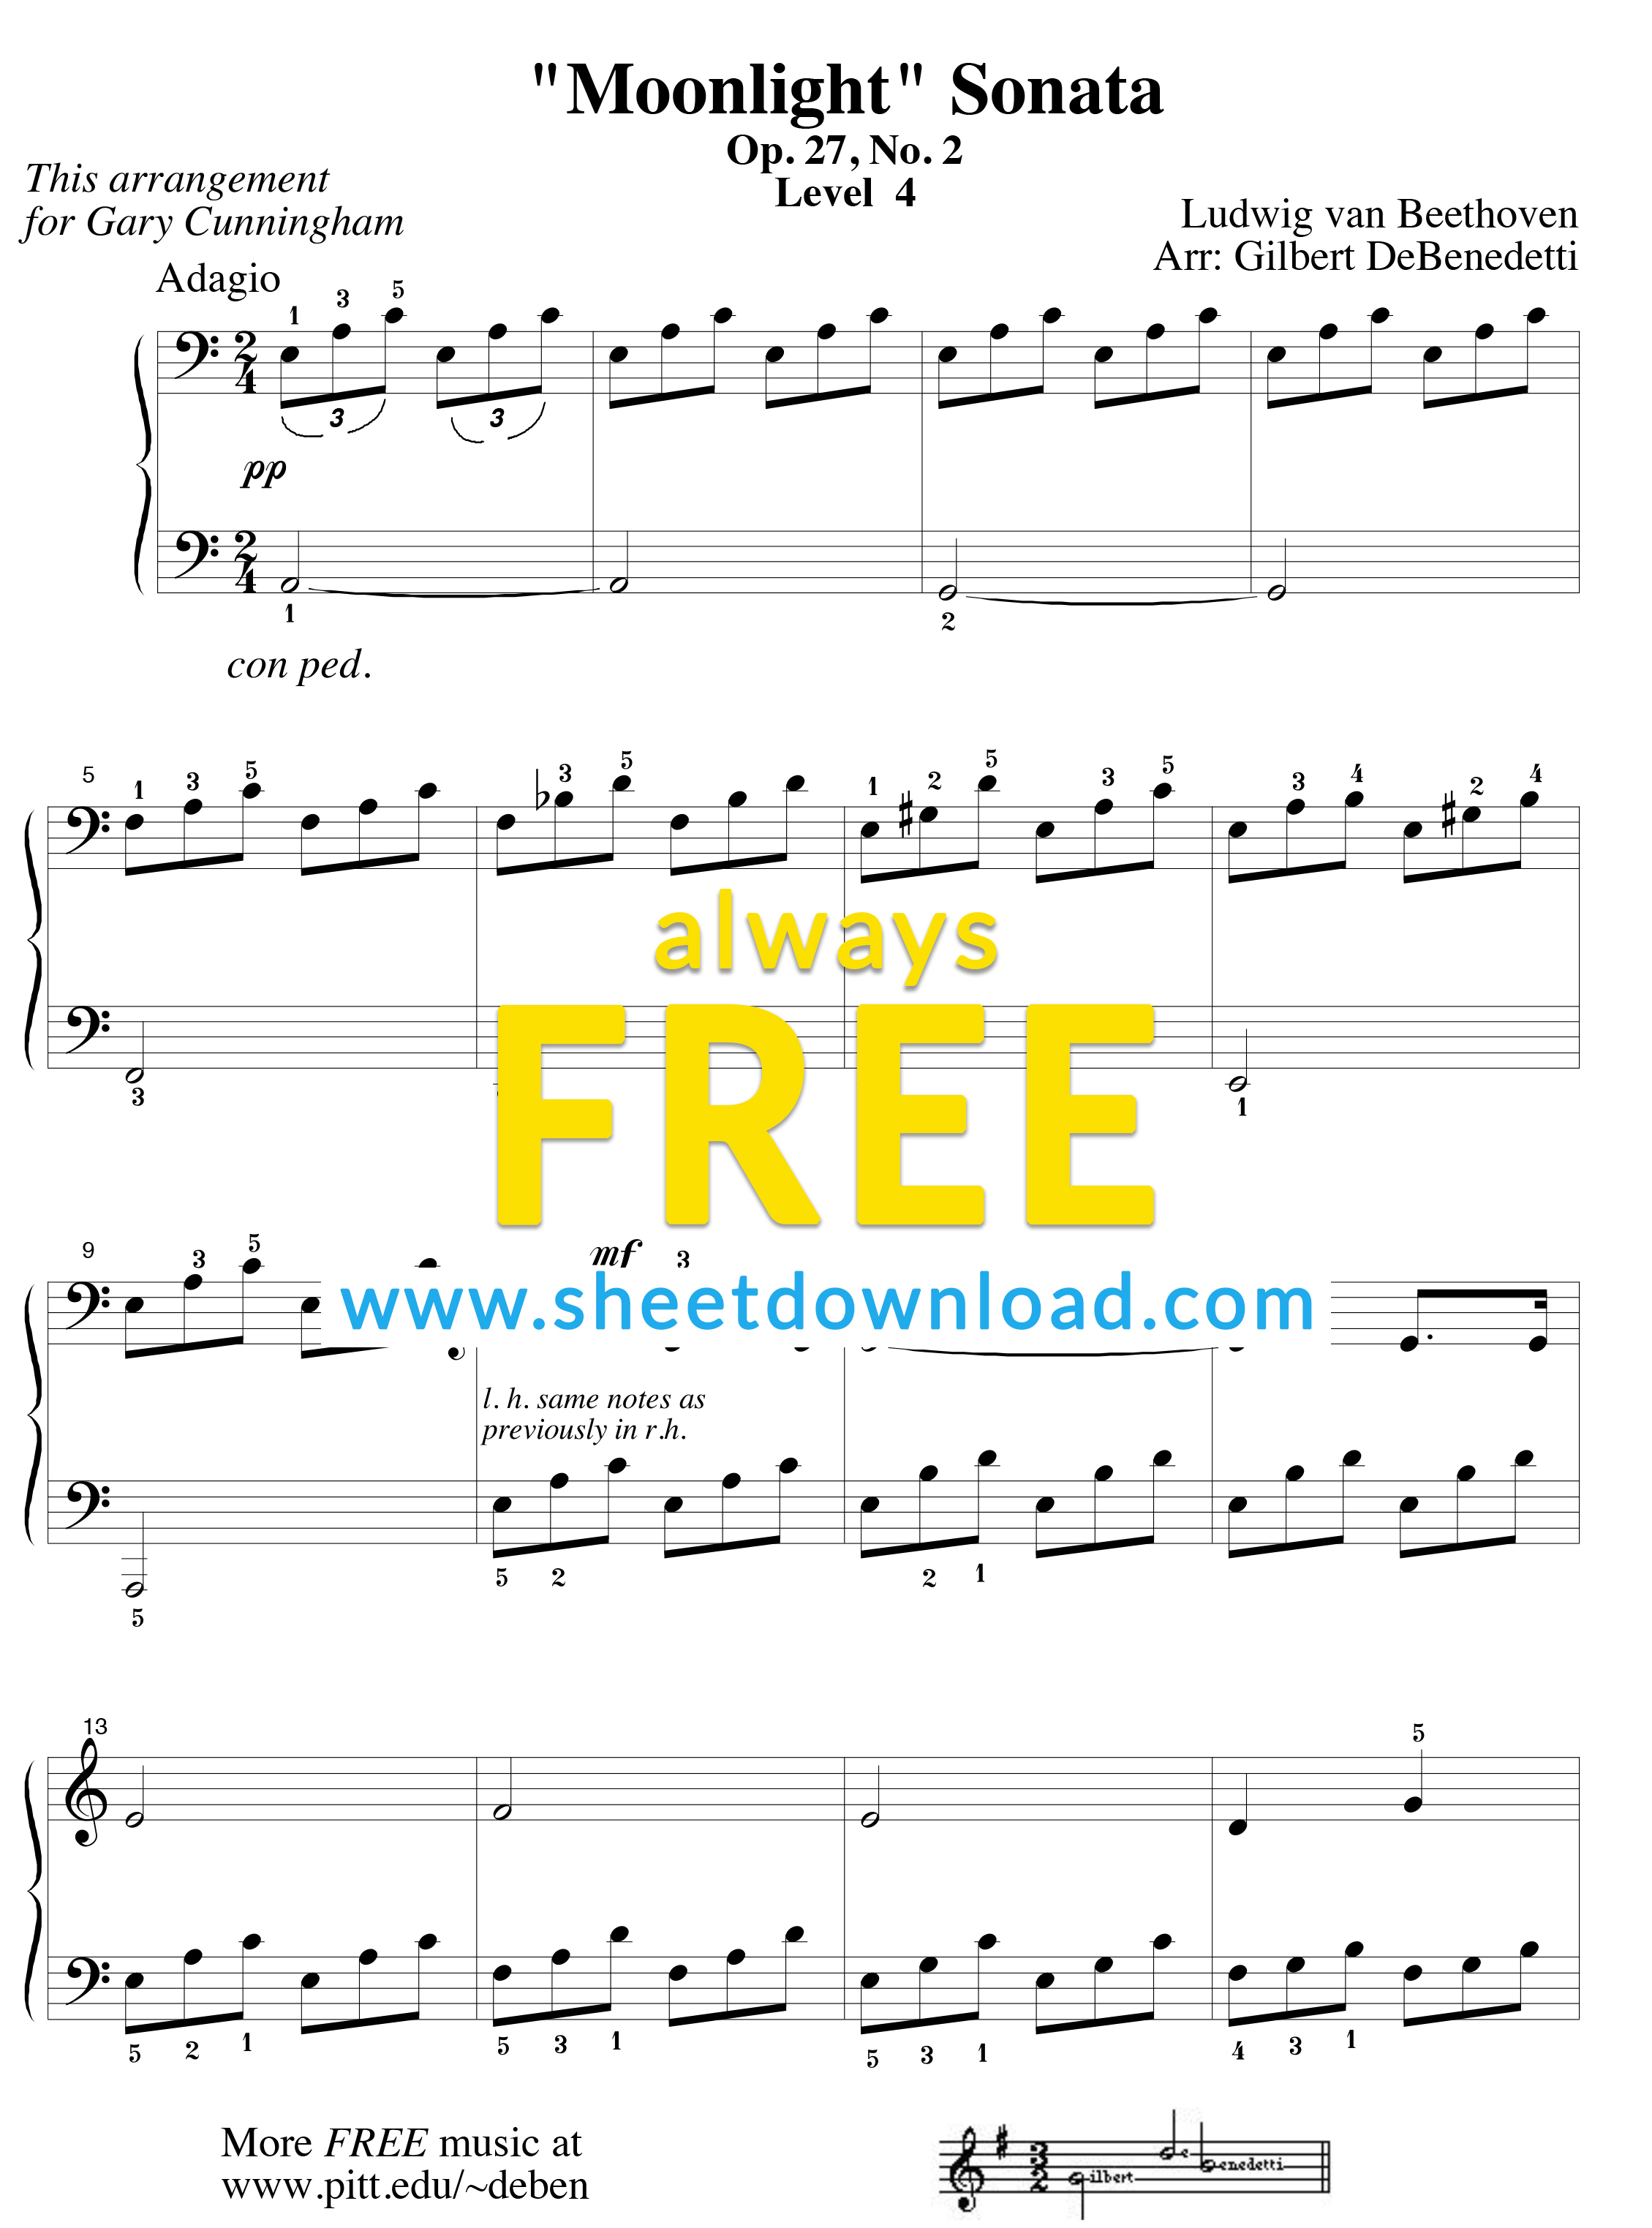 Free Piano Sheet Music To Download And Print - High Quality Pdfs - Free Printable Classical Sheet Music For Piano